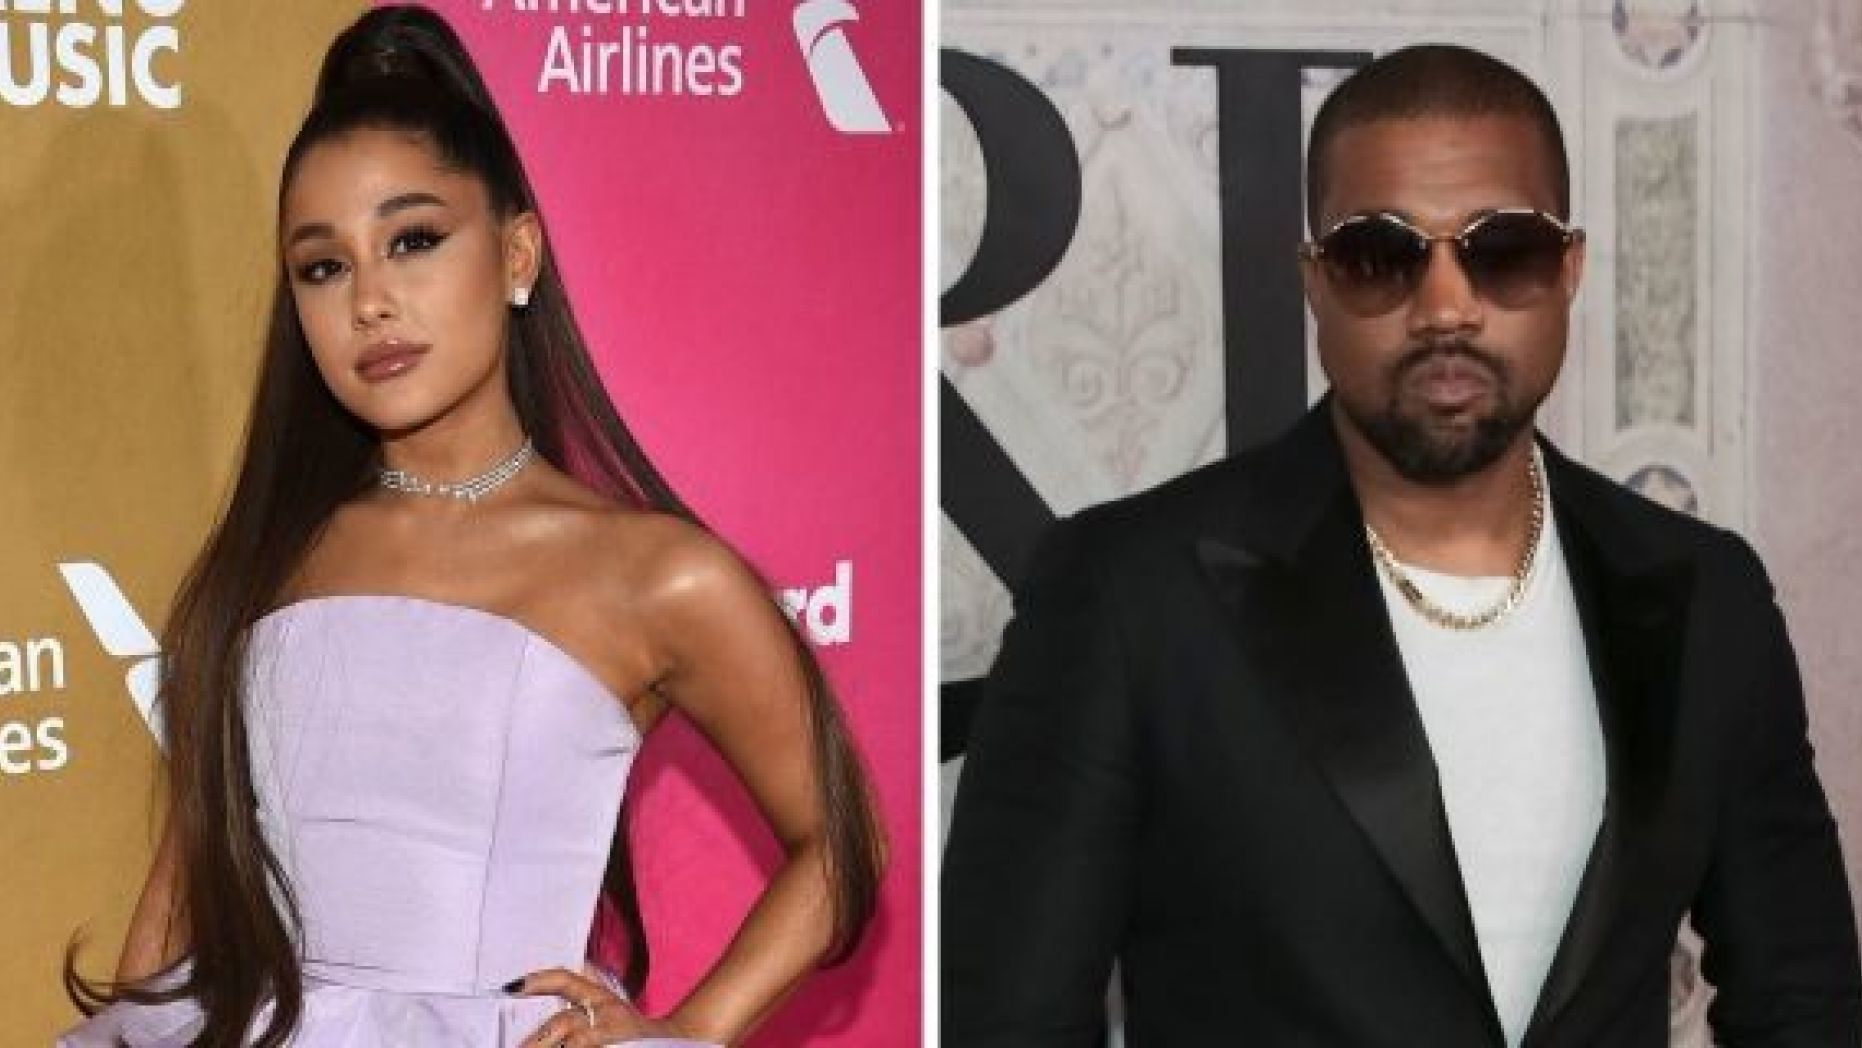 Ariana Grande apologized to Kanye West after he accused her of using his feud wtih Drake to promote a song.